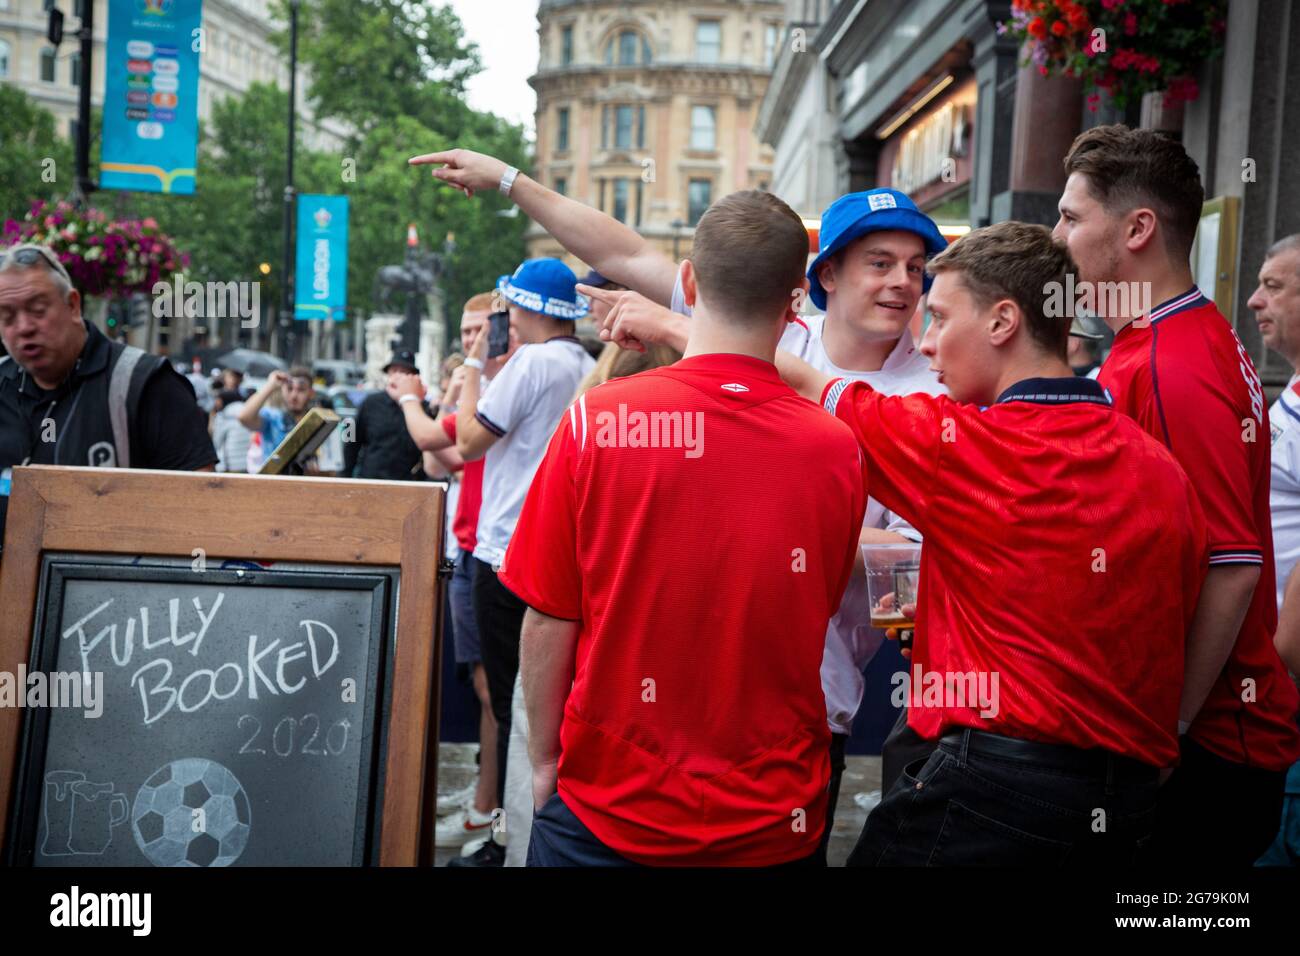 Euro 2020 Final England vs. Italy     Due to Covod restrictions, bookings were required to be able to watch the match in any of the pubs in London. Stock Photo